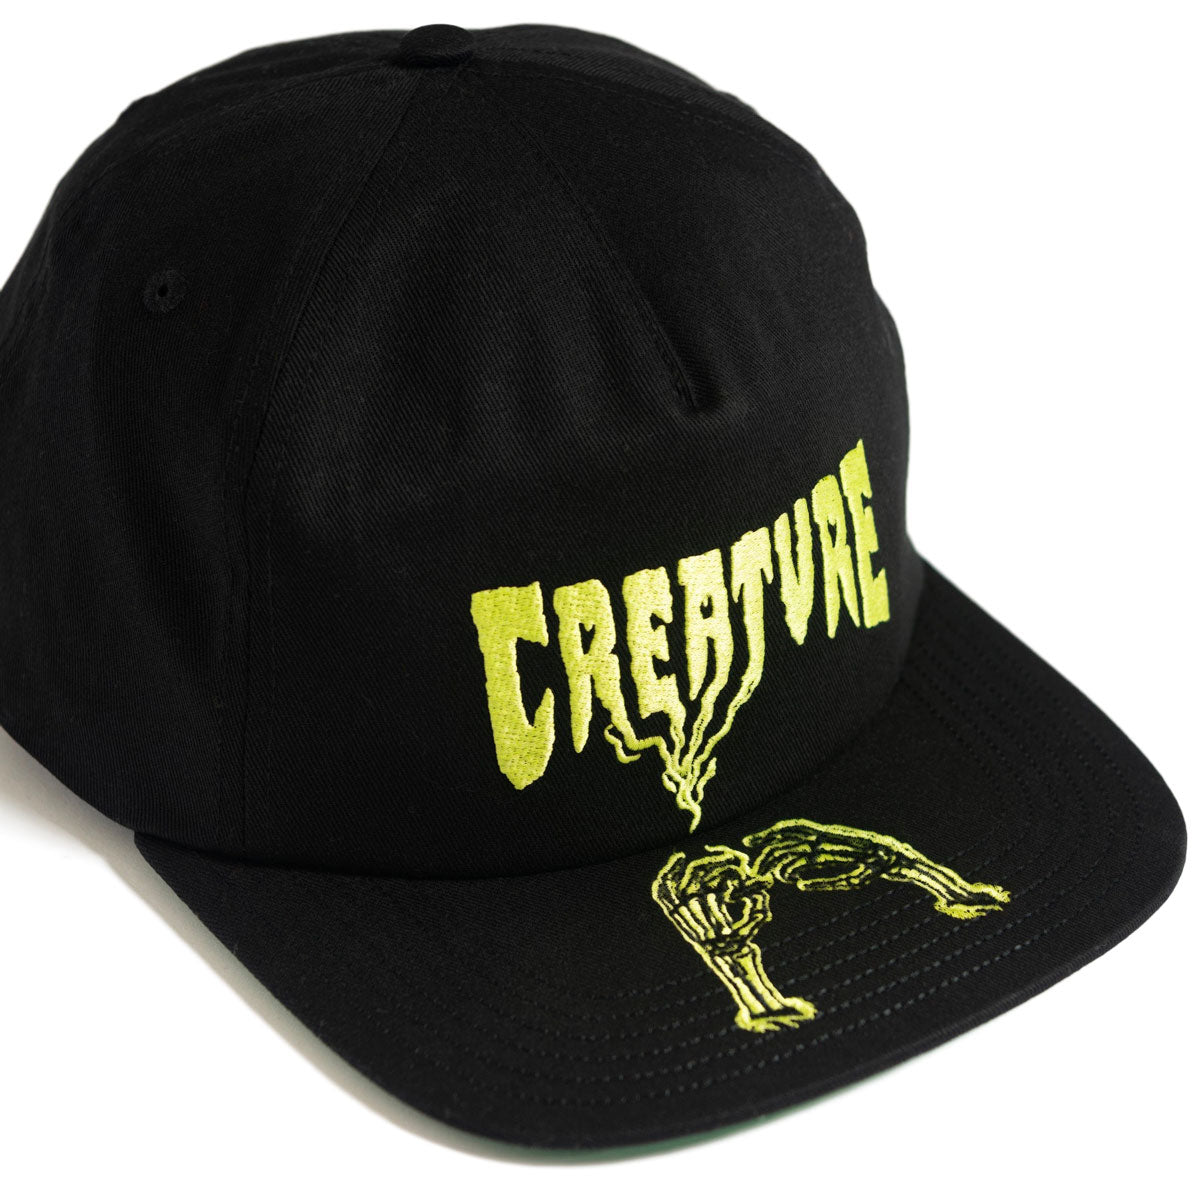 Creature Rolling In The Grave Snapback Hat - Black image 2